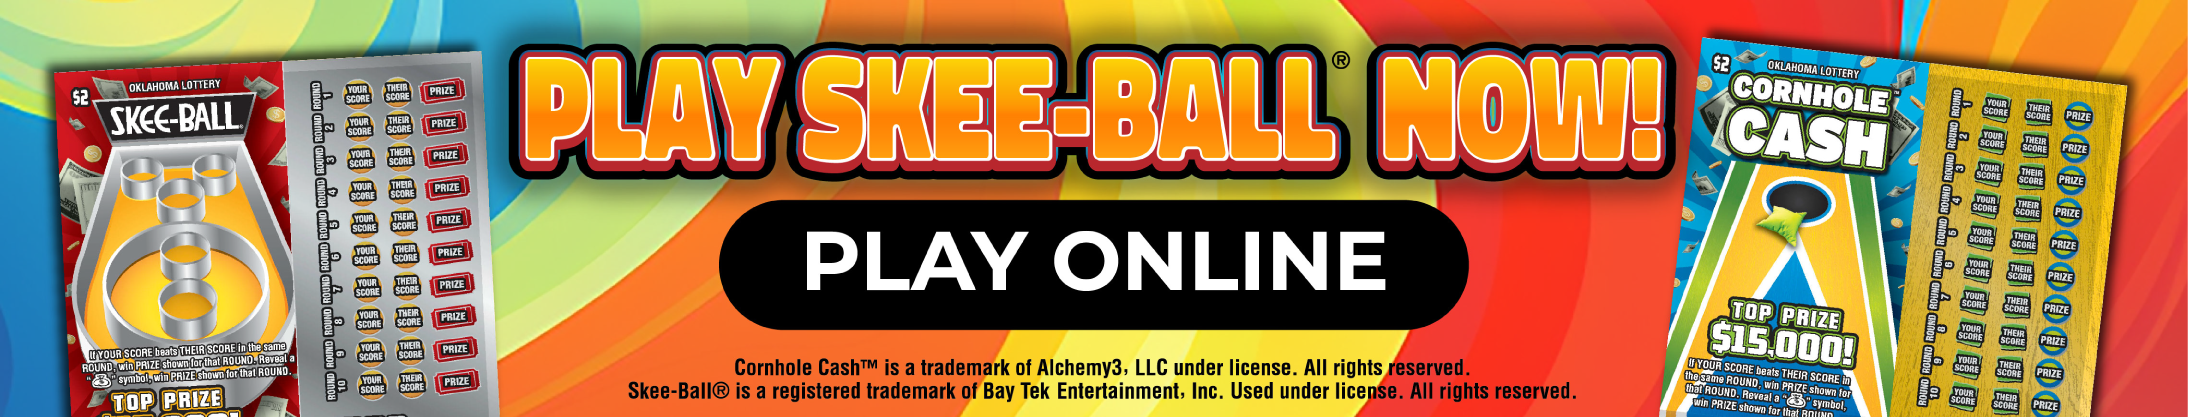 Play Skee-Ball and Cornhole now!